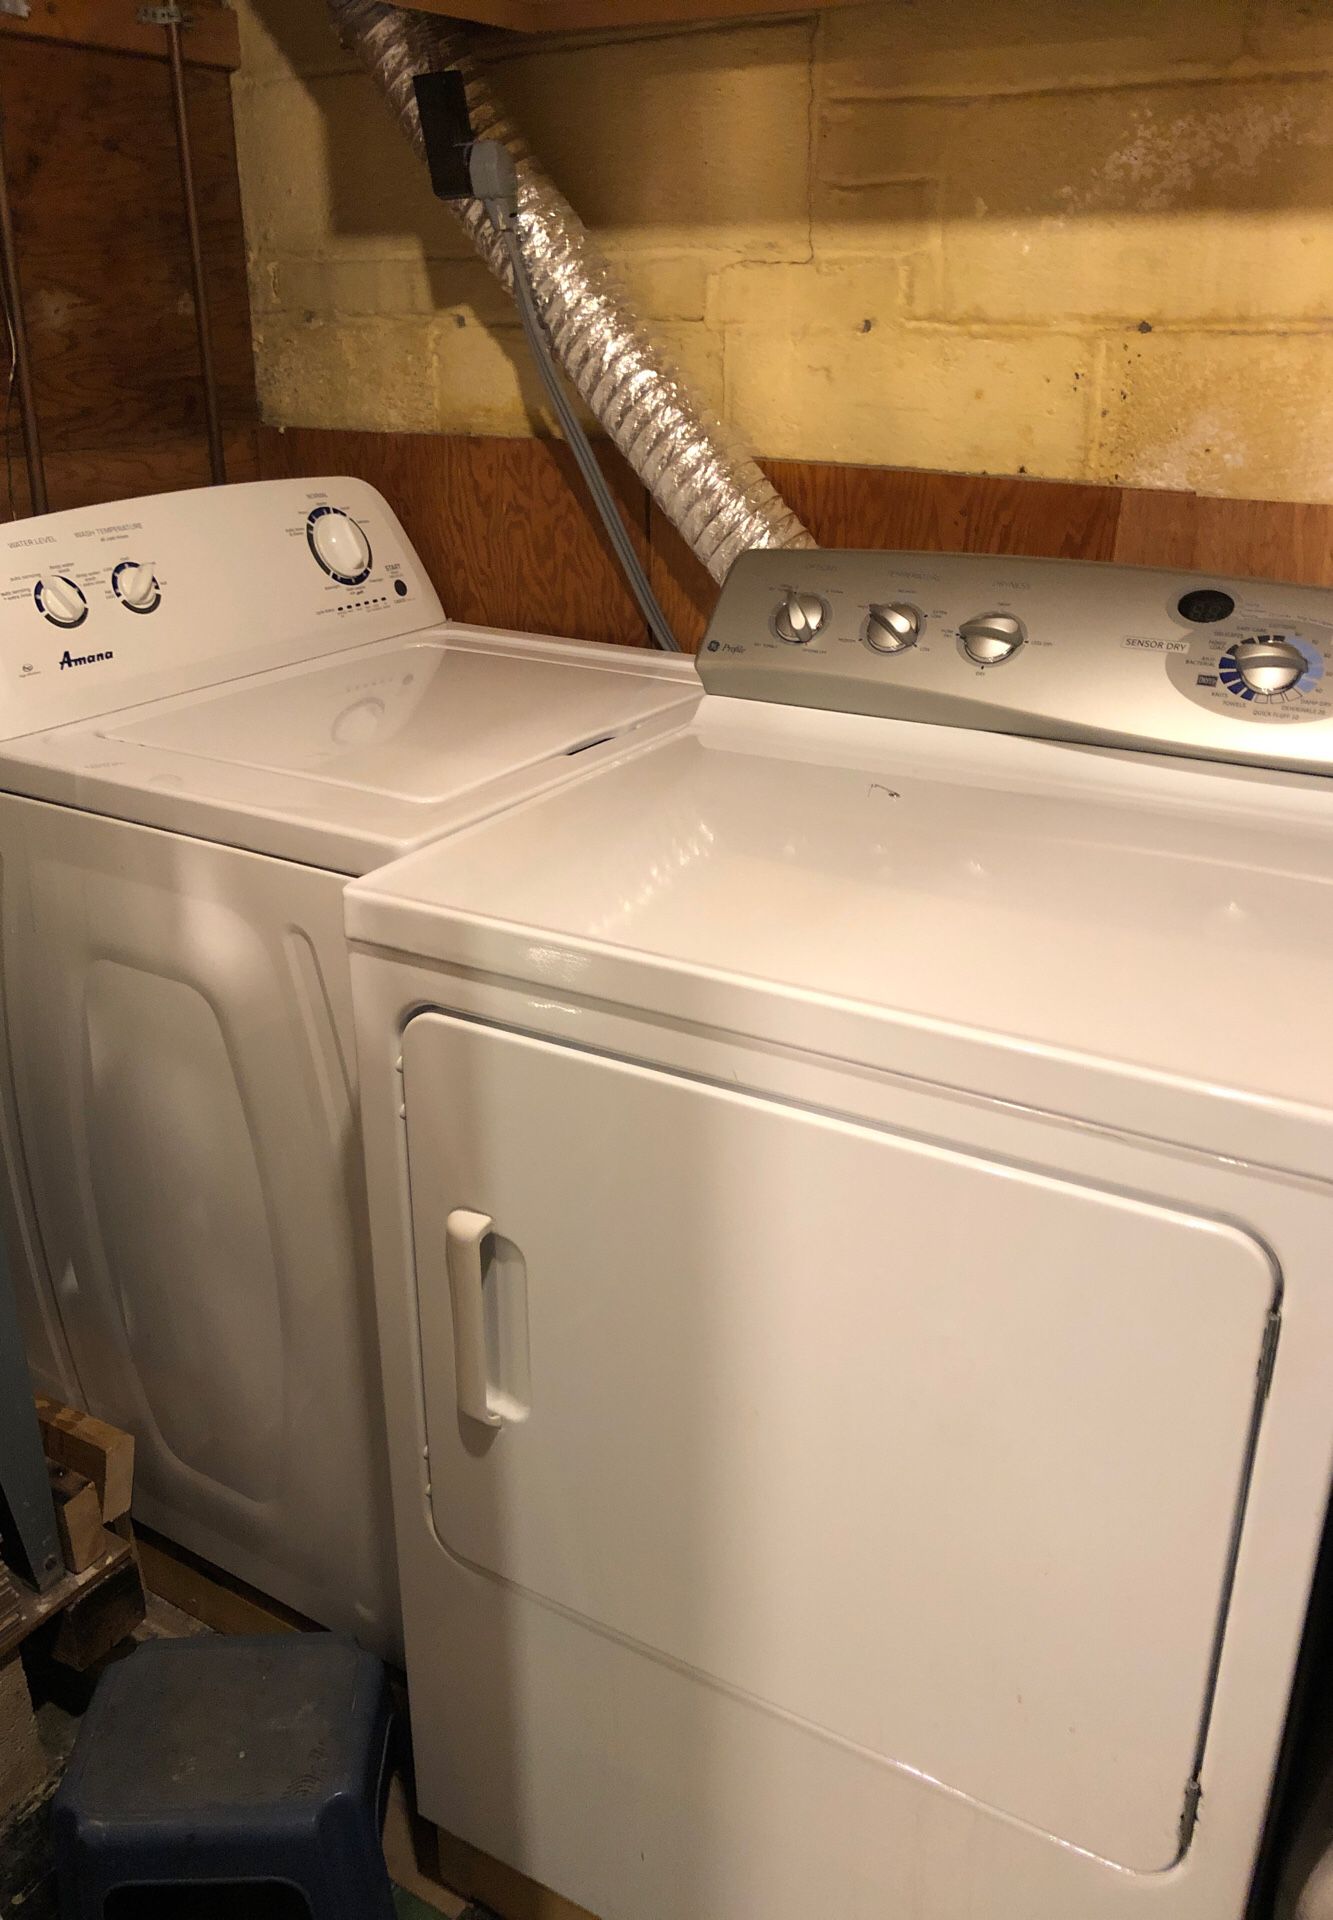 Washers Amana and dryer Y E profile